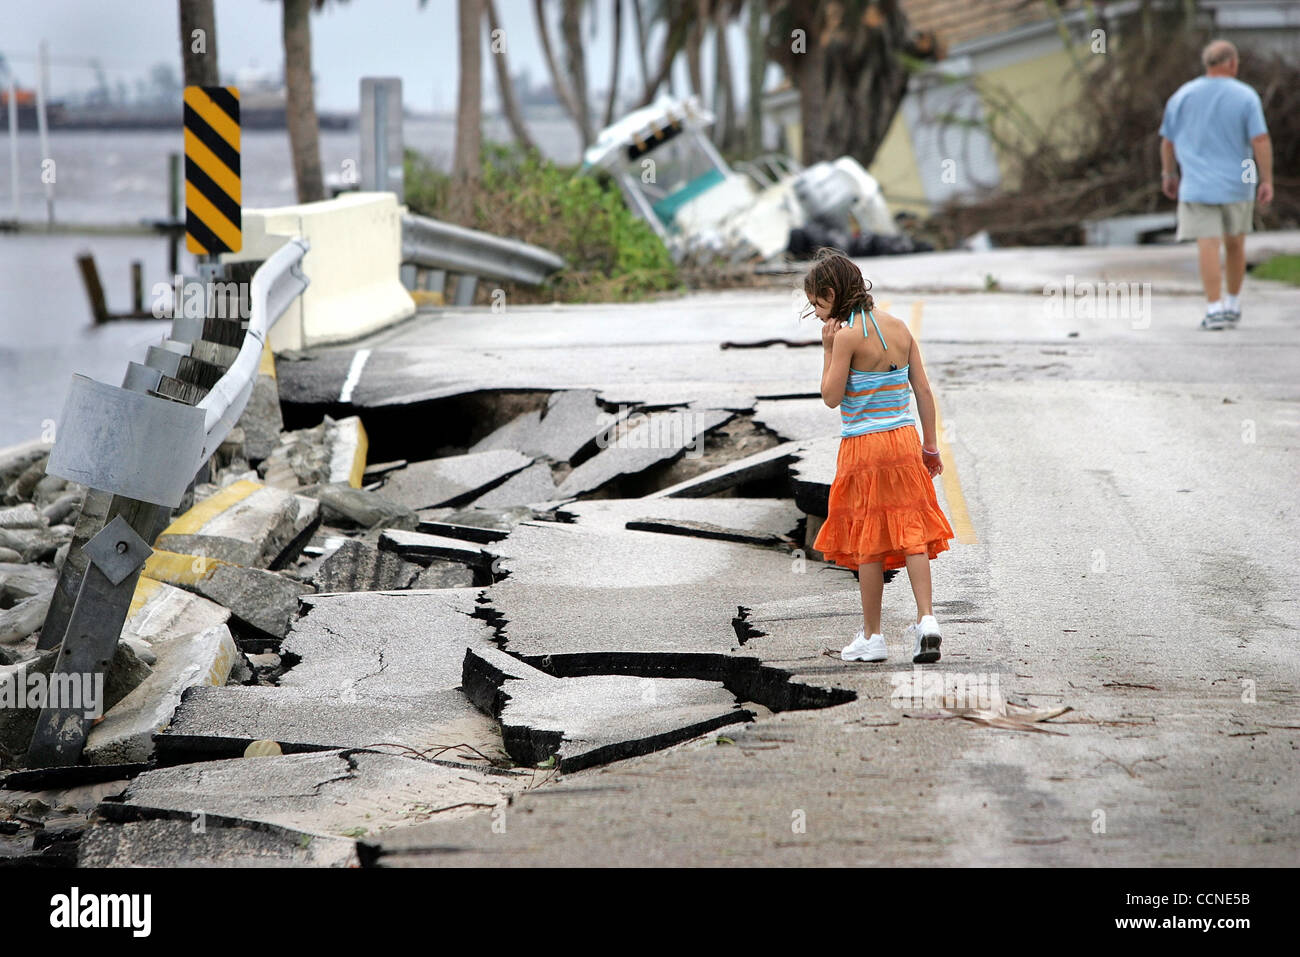 092604 SEWALL'S POINT - STUART, FL - Katie Kinard, 9, looks at asphalt road damage while walking back to her home in The Archipelago neighborhood on Sewall's Point after Hurricane Jeanne hit Sunday.  Katie and her parents Ellen and Jim parked their car at the front of the neighborhood to avoid the r Stock Photo